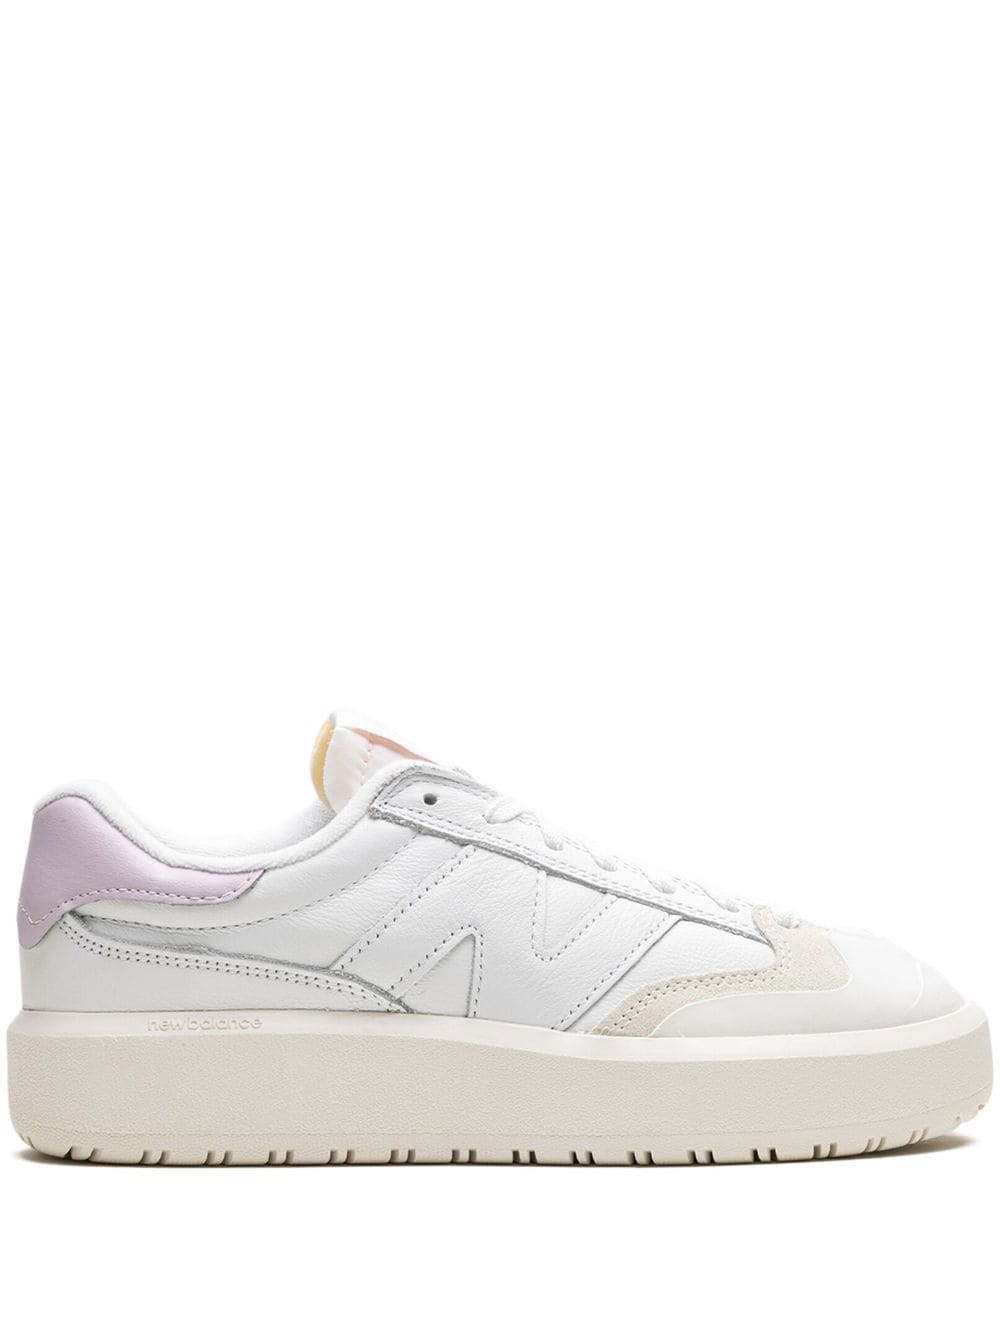 New Balance CT302 leather sneakers - White von New Balance